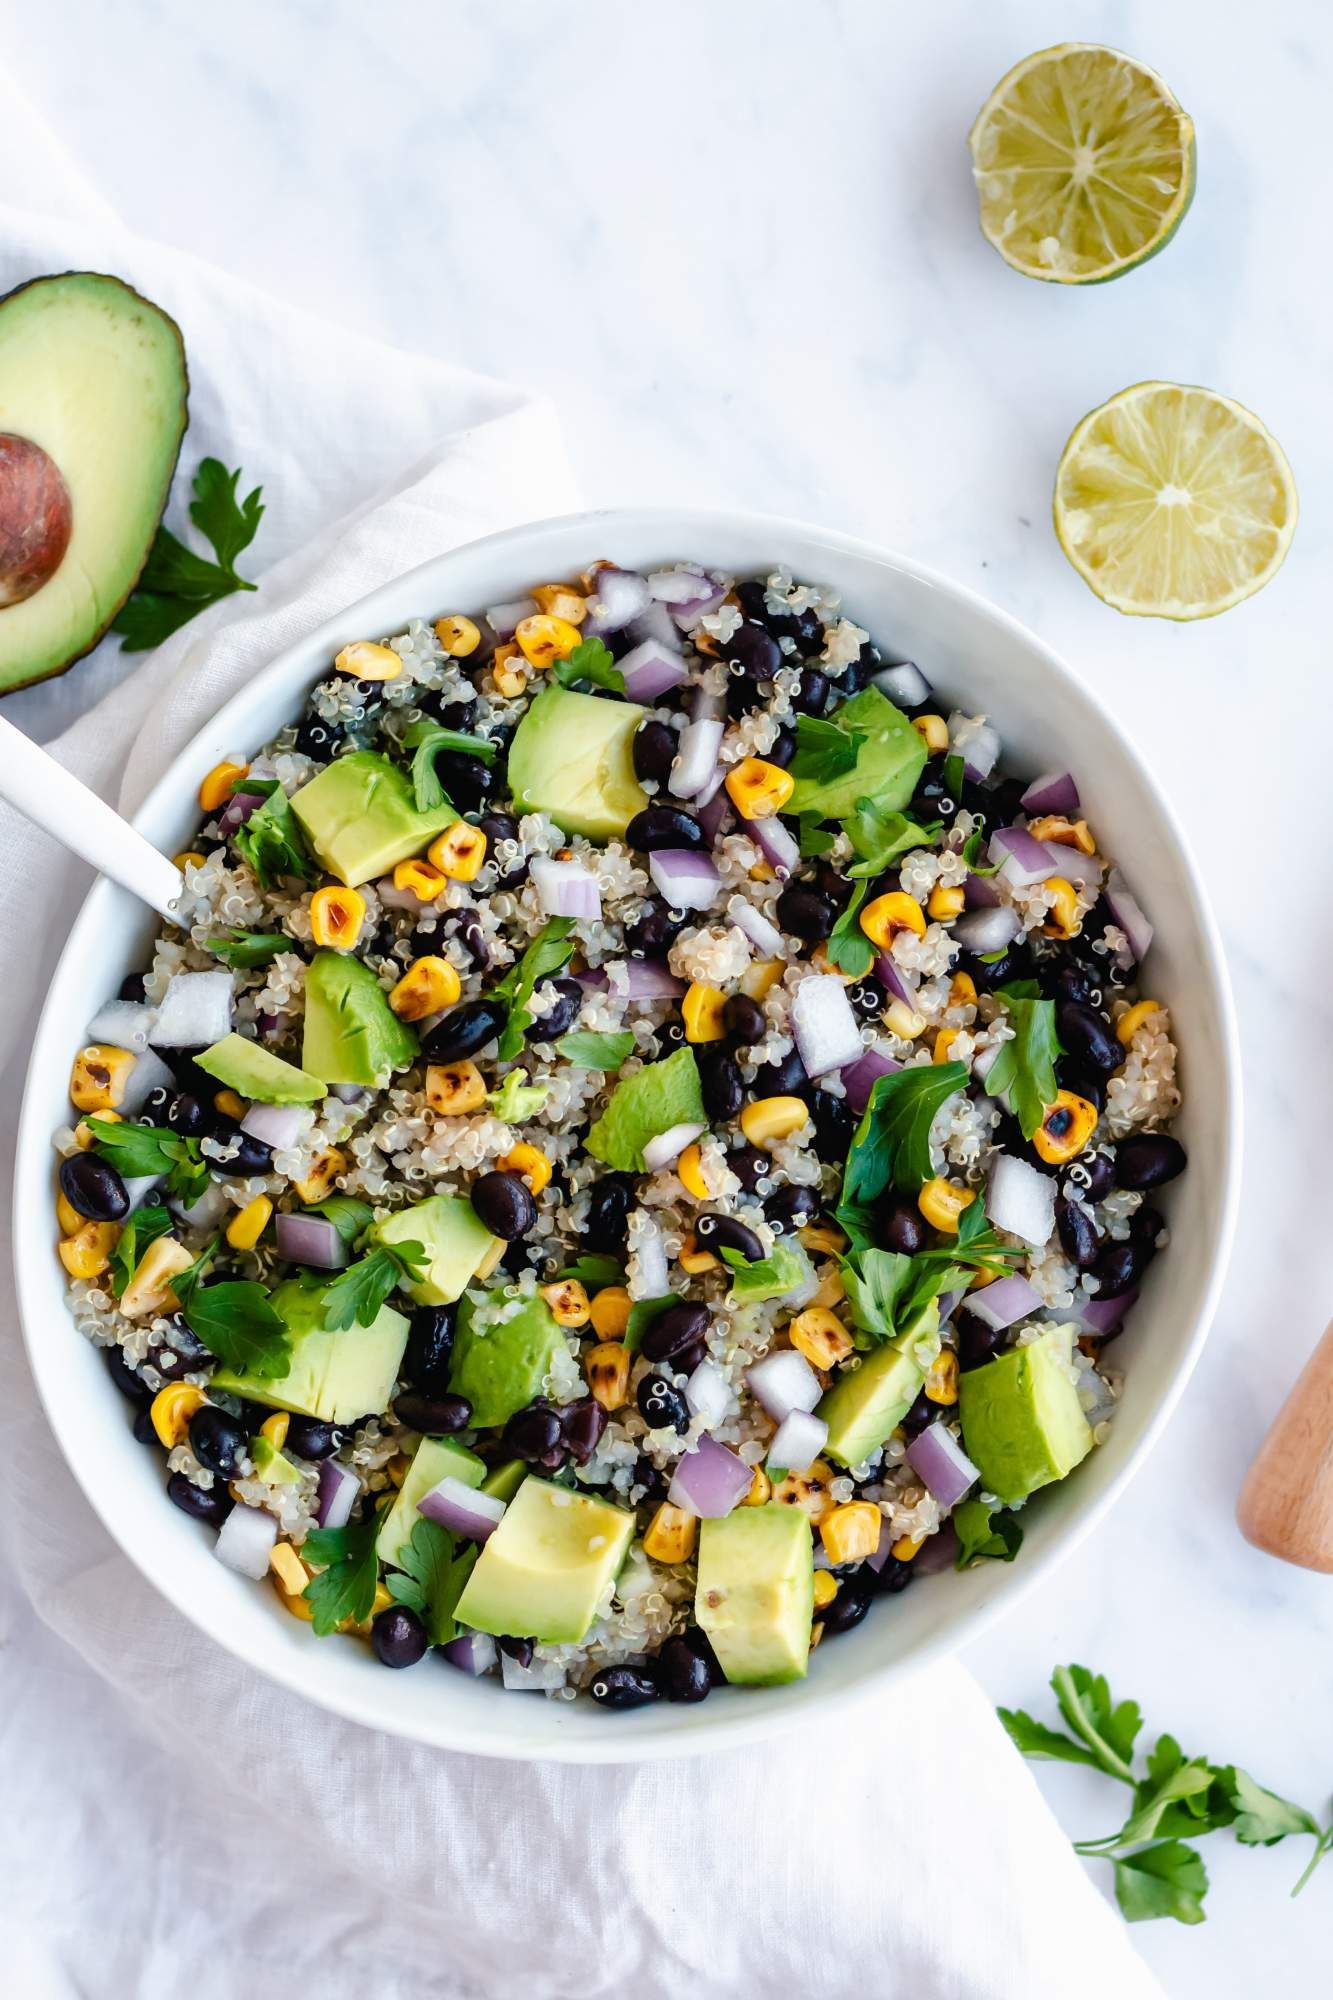 Black bean and quinoa salad with avocado, cilantro, corn, and red onion in a bowl with limes on the side.